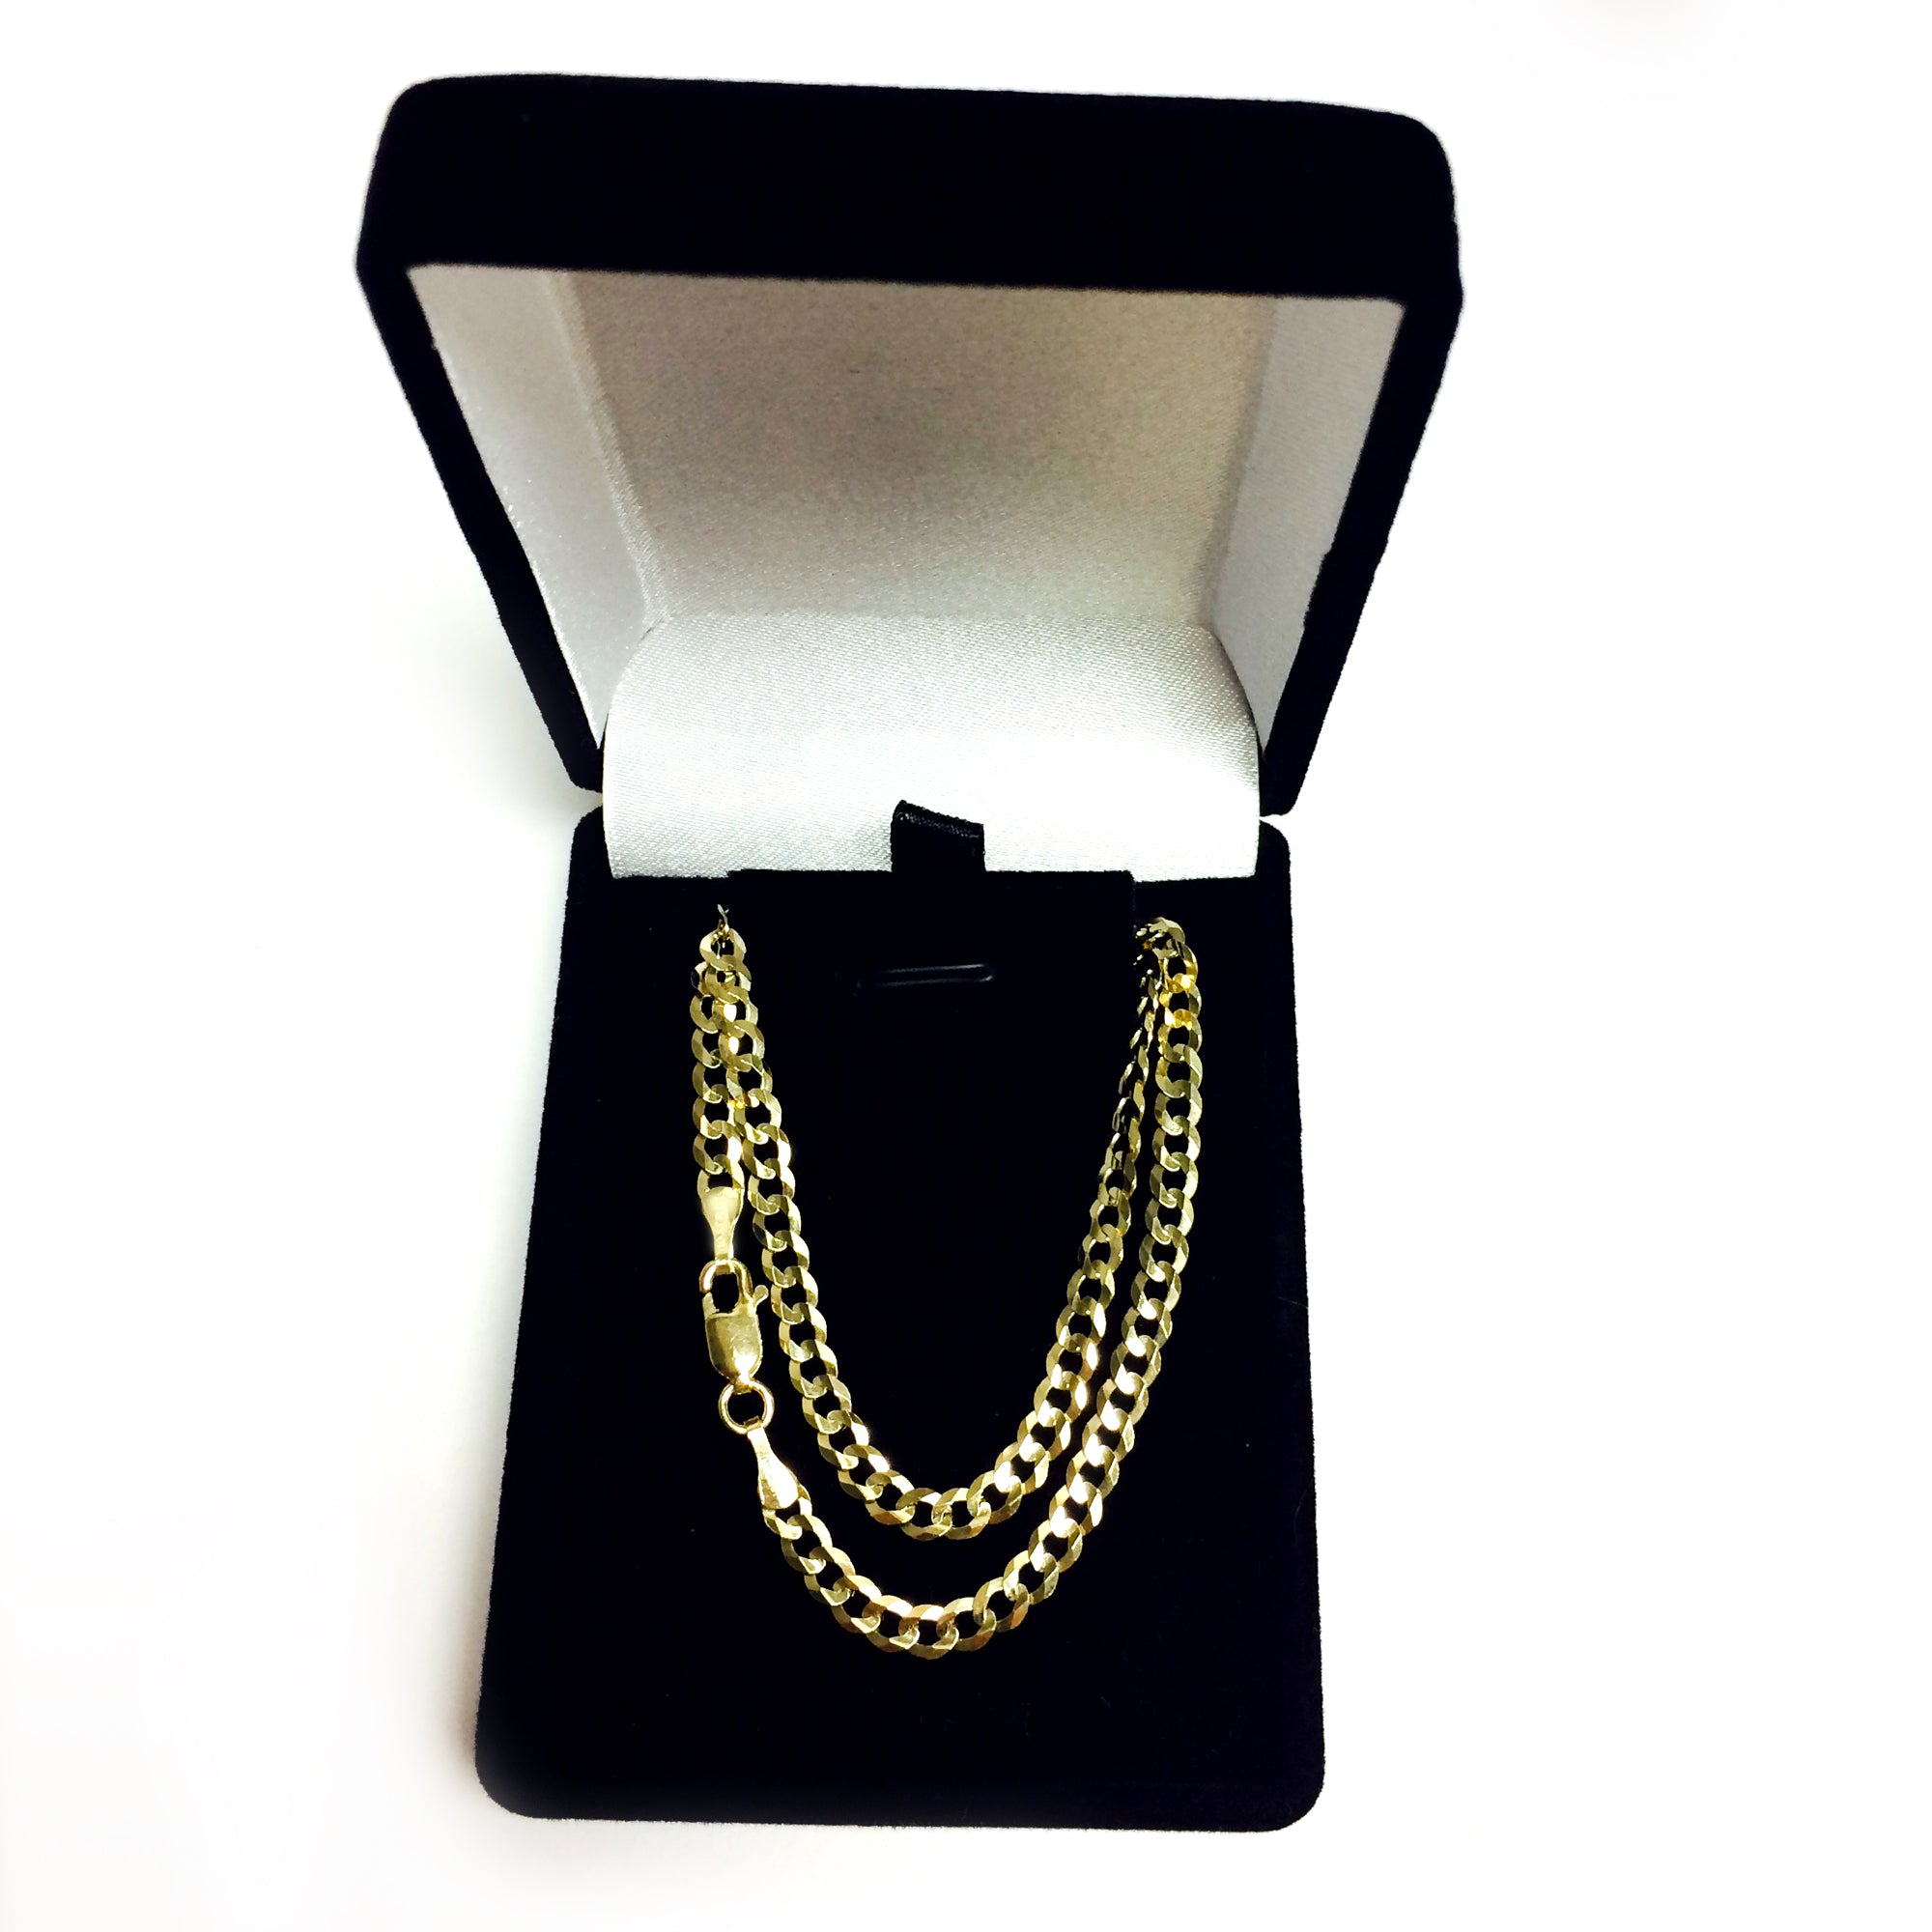 10k Yellow Gold Comfort Curb Chain Necklace, 3.6mm fine designer jewelry for men and women